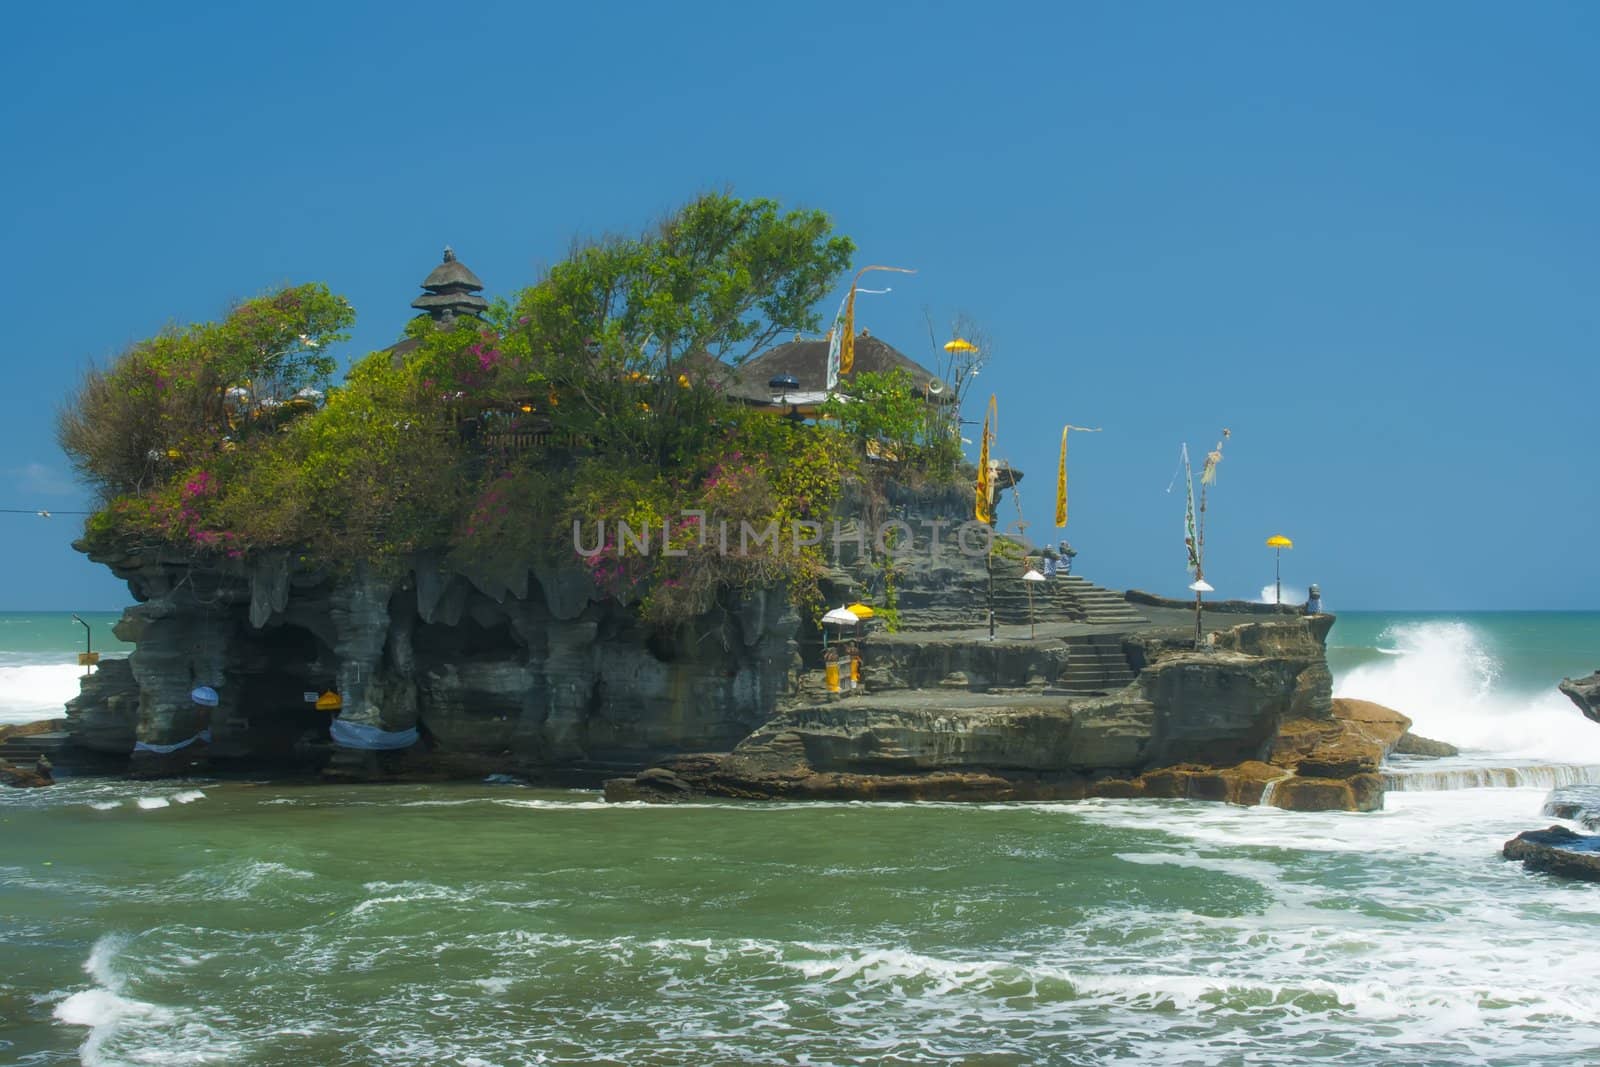  Tanah Lot and waves. by GNNick